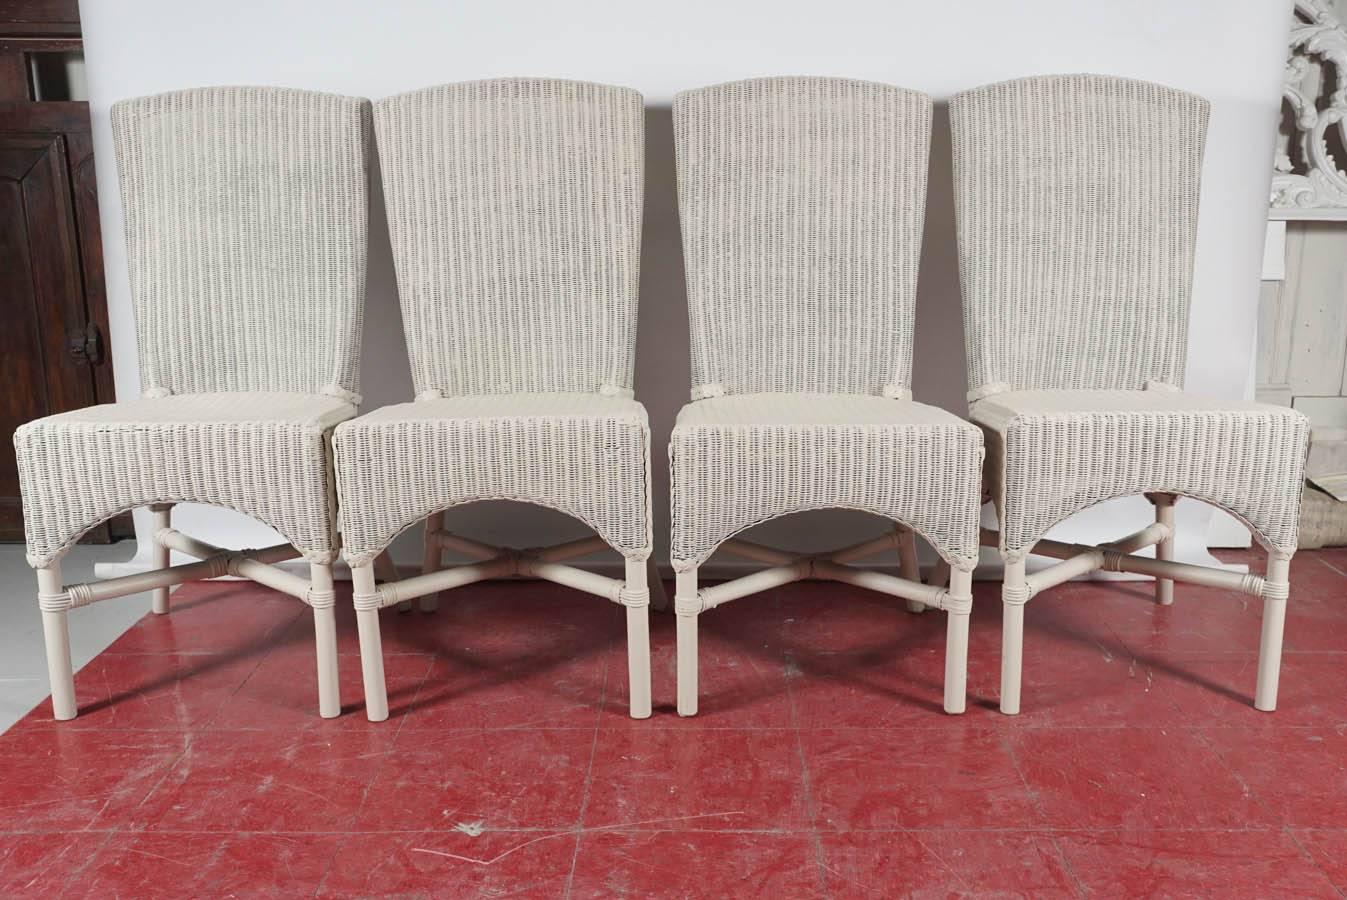 This set of 6 (only 4 shown) wicker like chairs are vintage Lloyd Loom which refers to a process invented in 1917 by the American Marshall B. Lloyd, who twisted kraft paper round a metal wire, placed the paper threads on a loom and wove them into